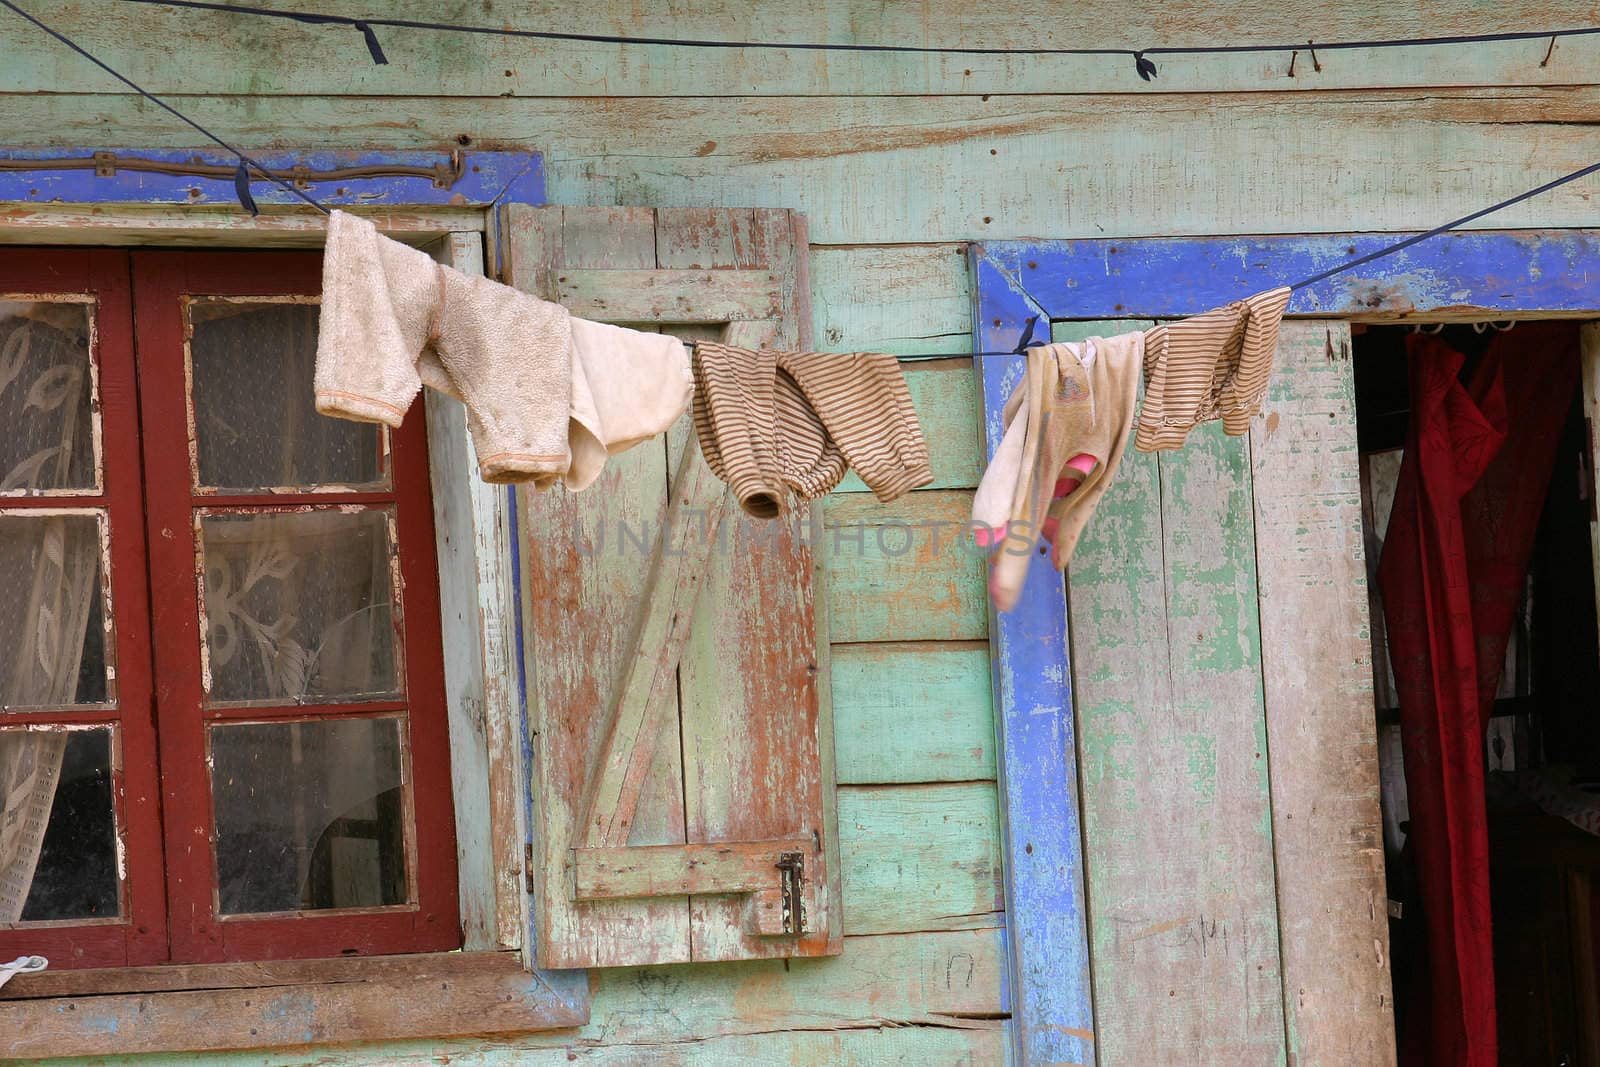 Dirty laundry is hanging out to dry in Madagascar